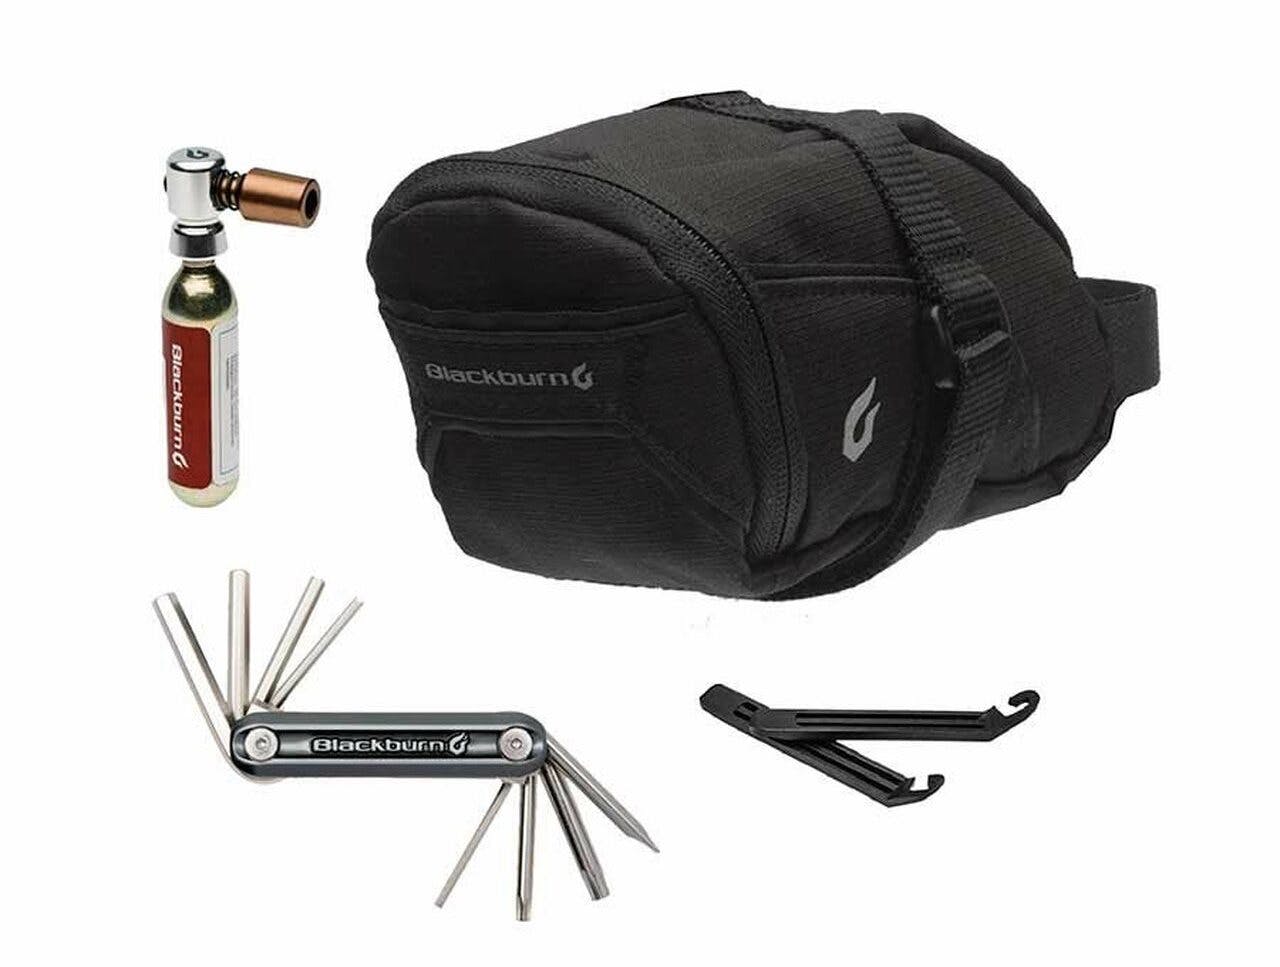 Essentials to Carry With You on Every Bike Ride